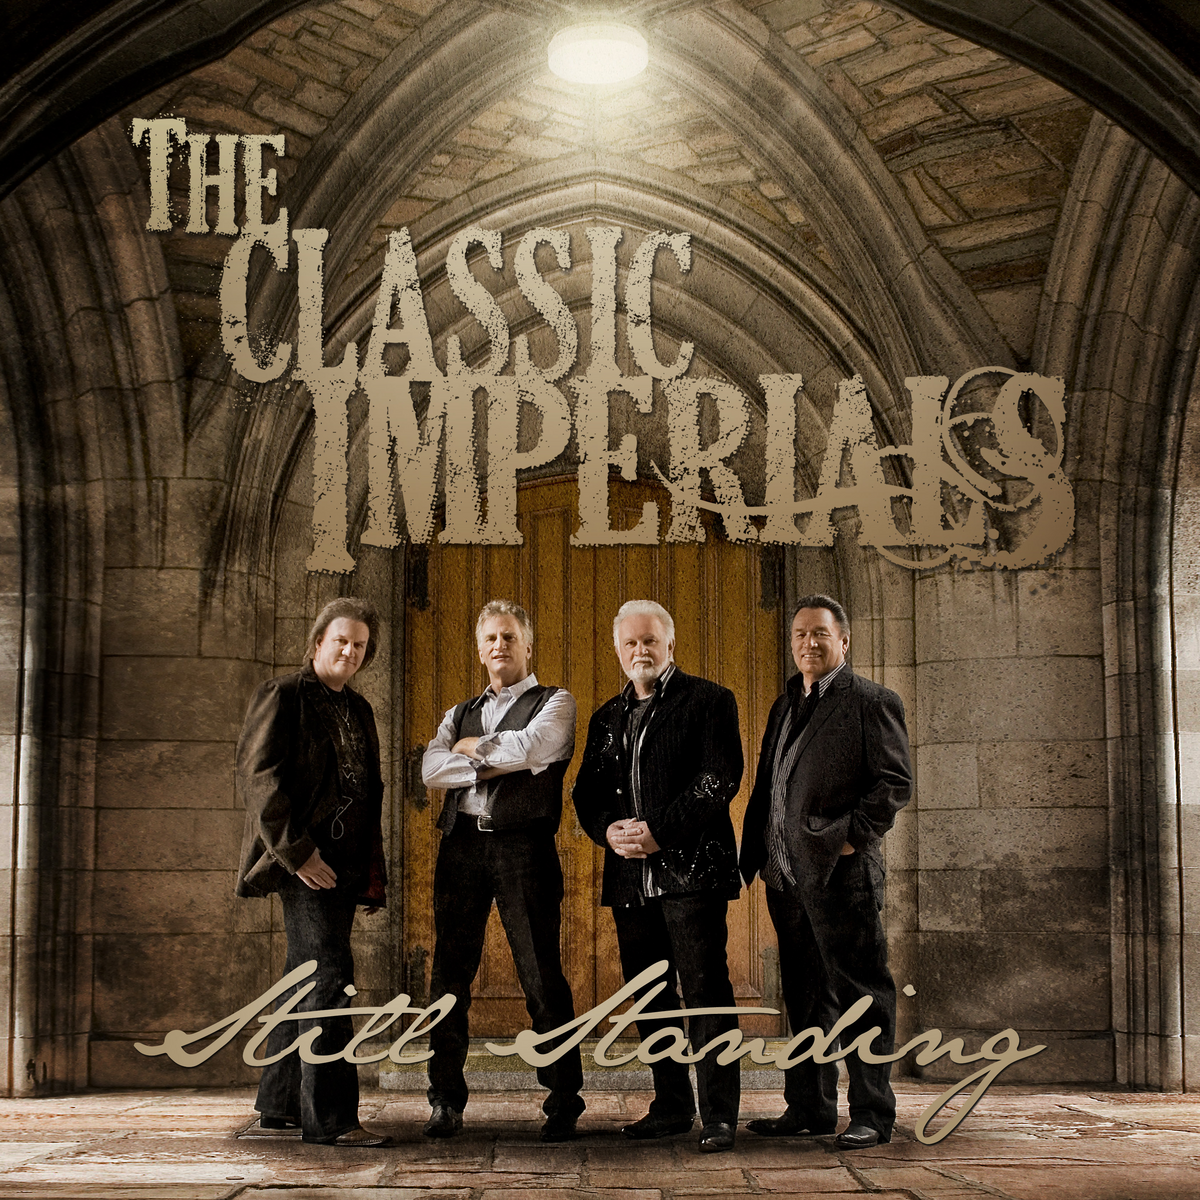 The Imperials - The Very Best of the Imperials [Word]